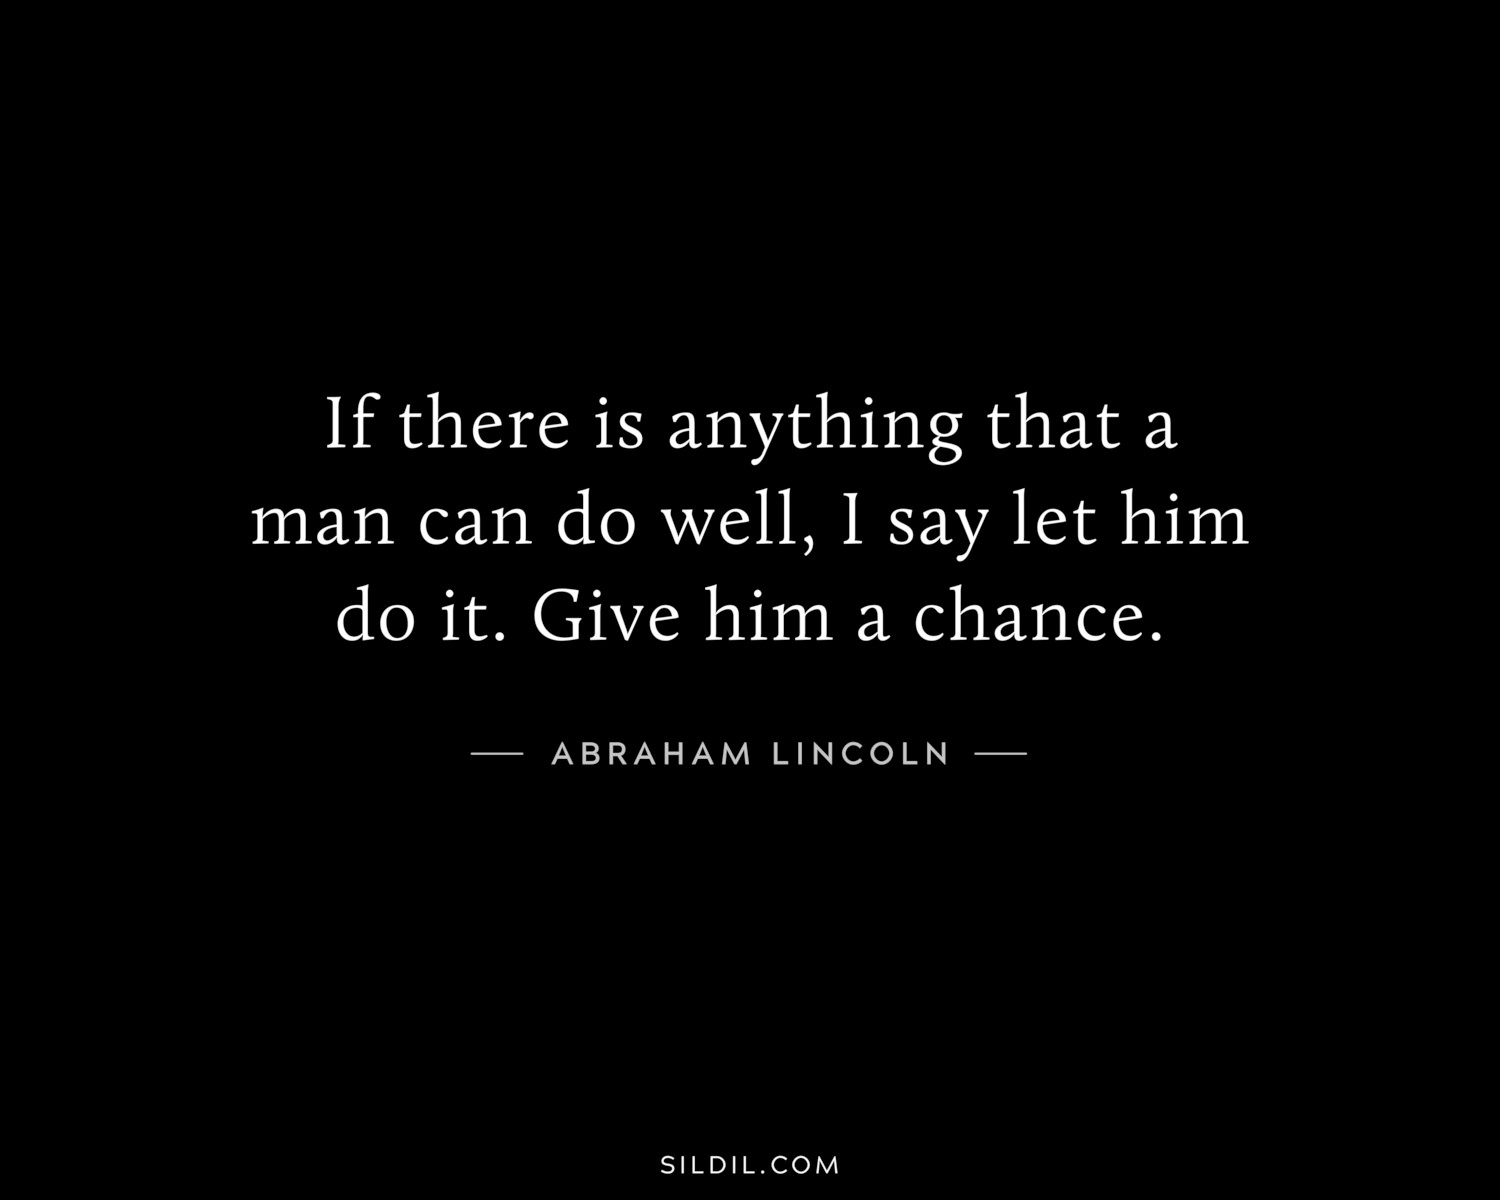 If there is anything that a man can do well, I say let him do it. Give him a chance.